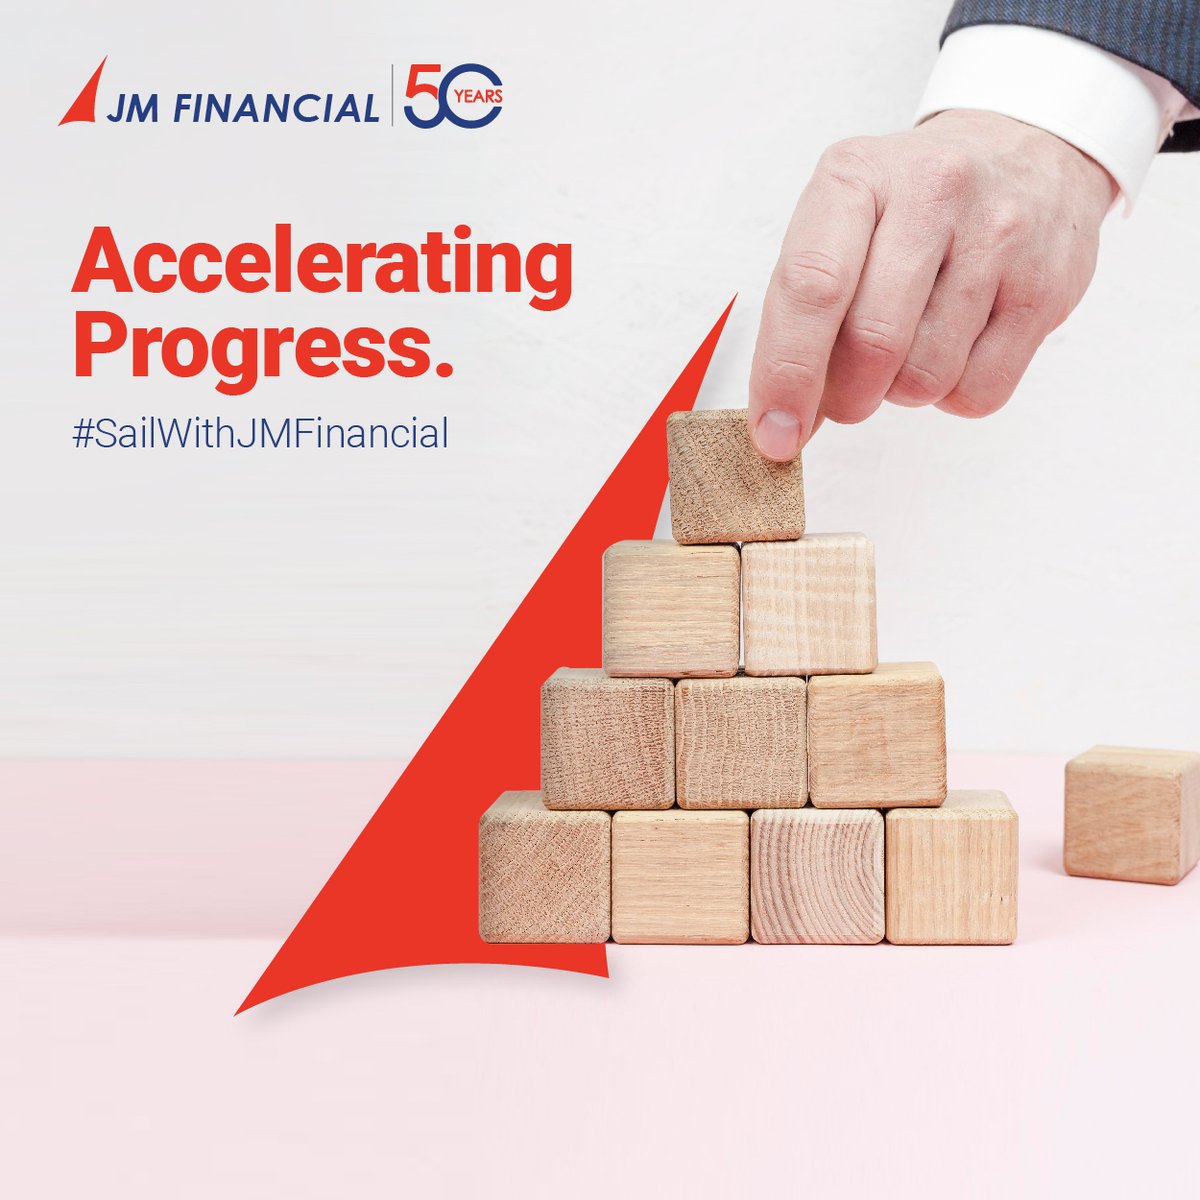 Igniting a revolution of accelerated growth. 

#JMFinancial #50yearsofJMFinancial #SailWithJMFinancial